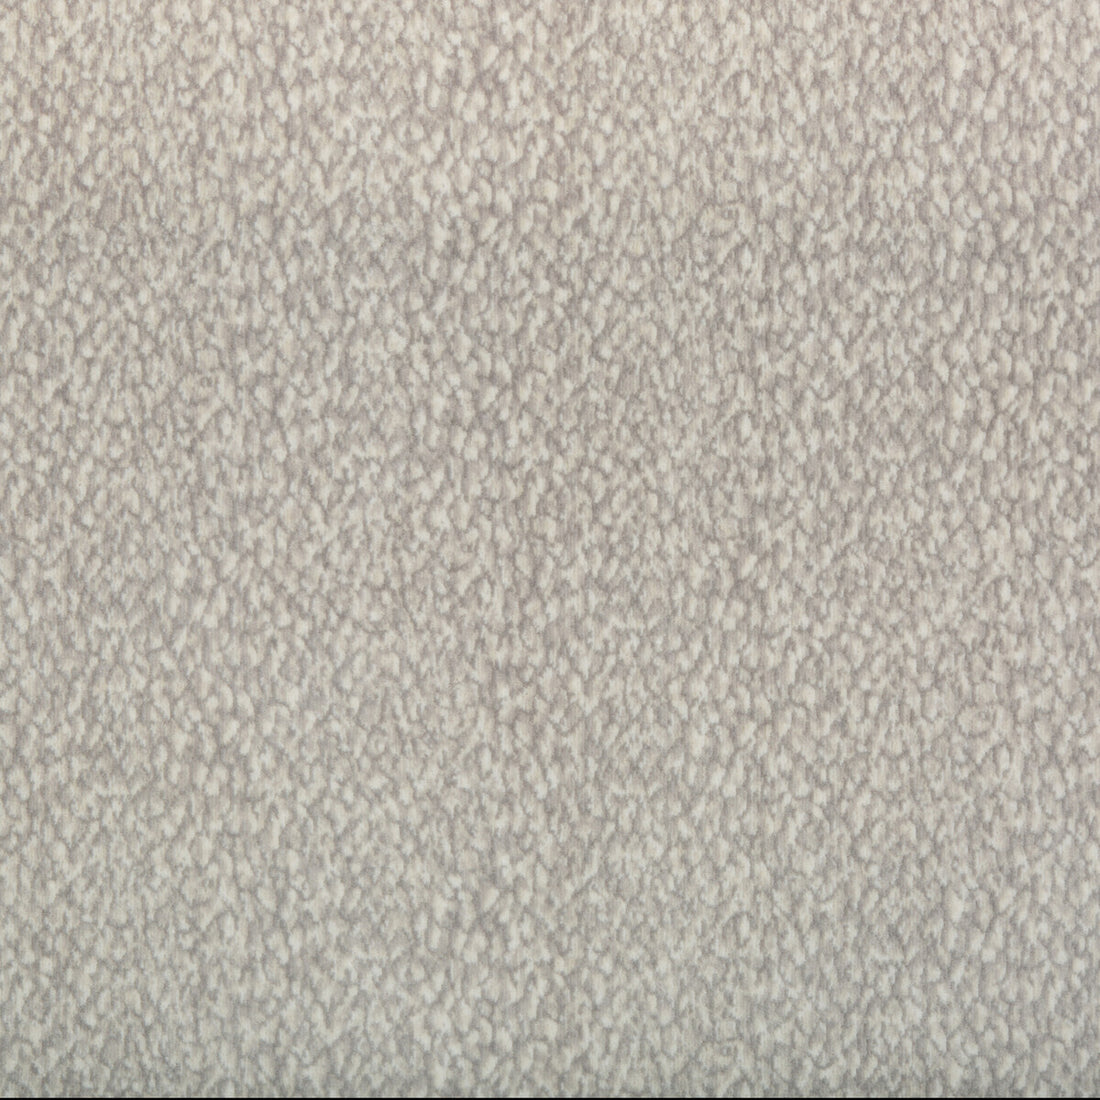 Littlerock fabric in stone color - pattern 34980.11.0 - by Kravet Basics in the Jeffrey Alan Marks Oceanview collection